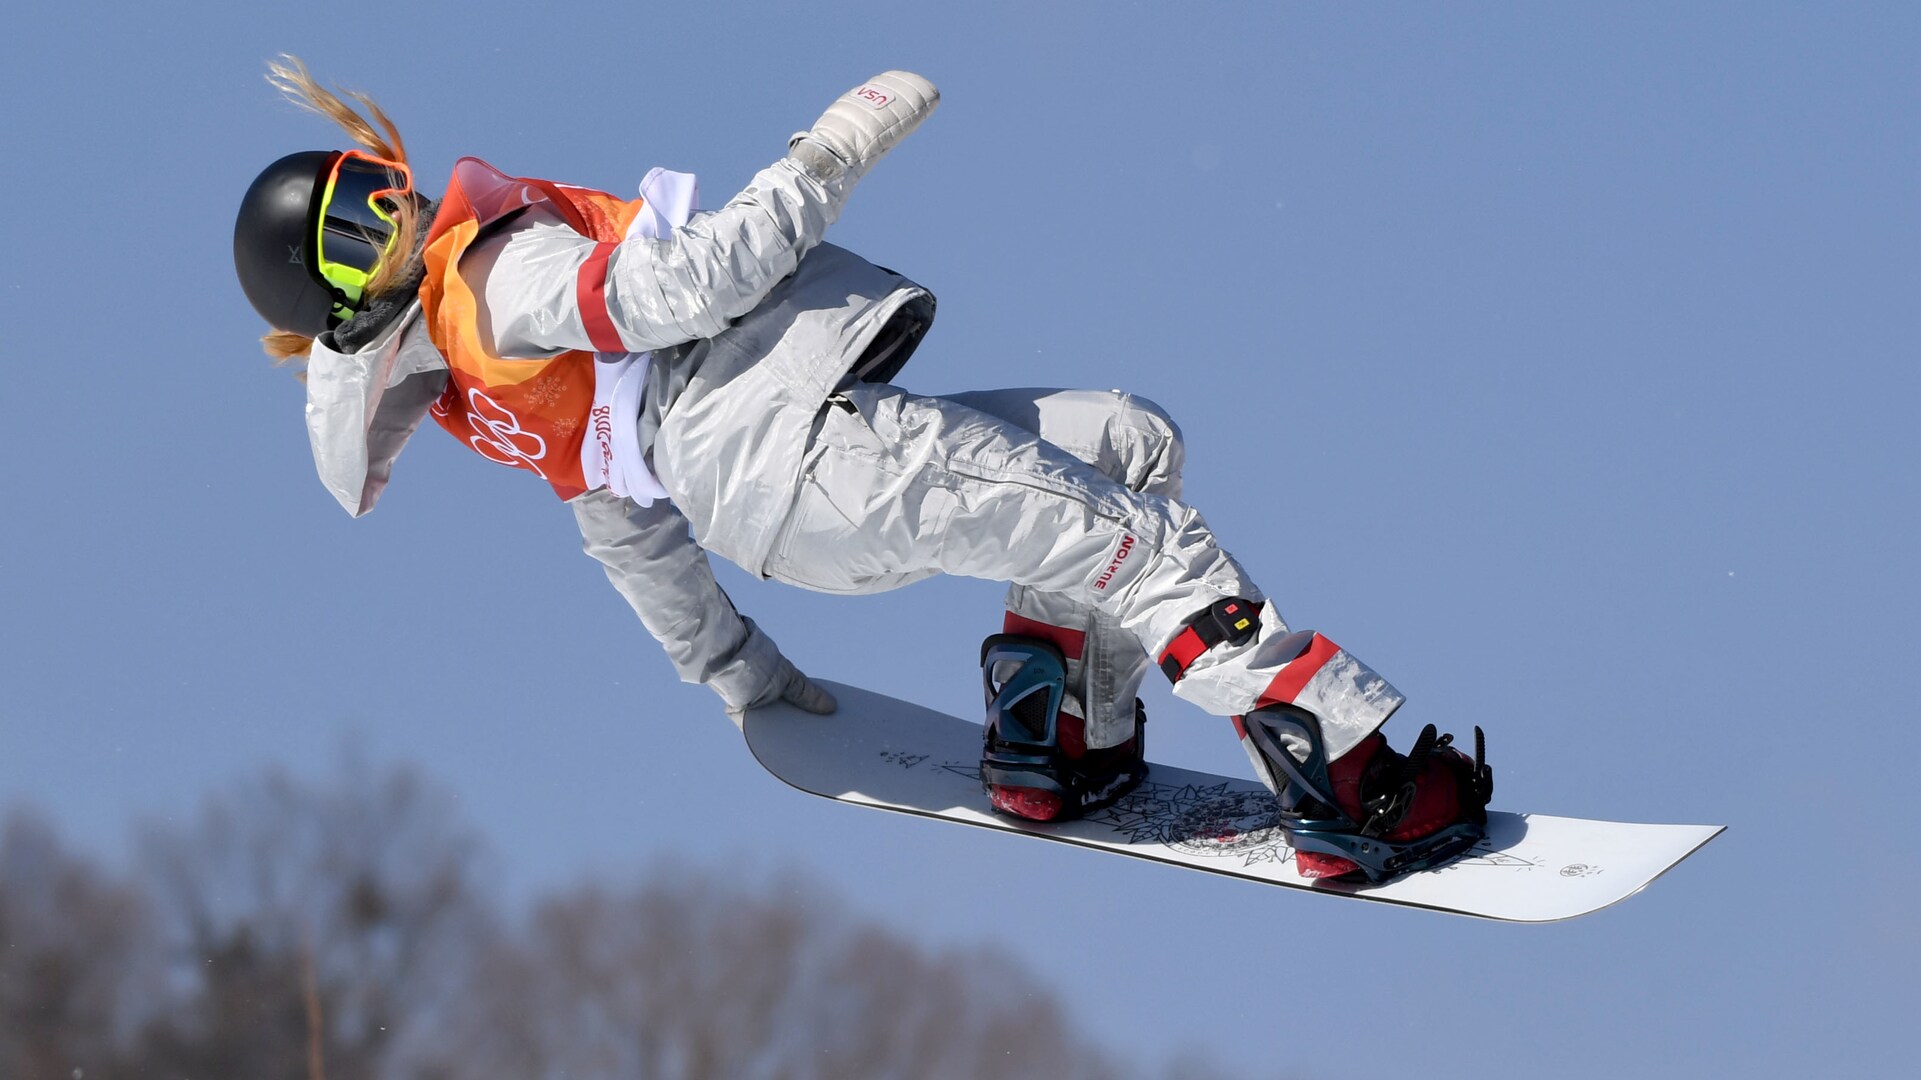 McTwisting to gold Learning snowboarders signature tricks